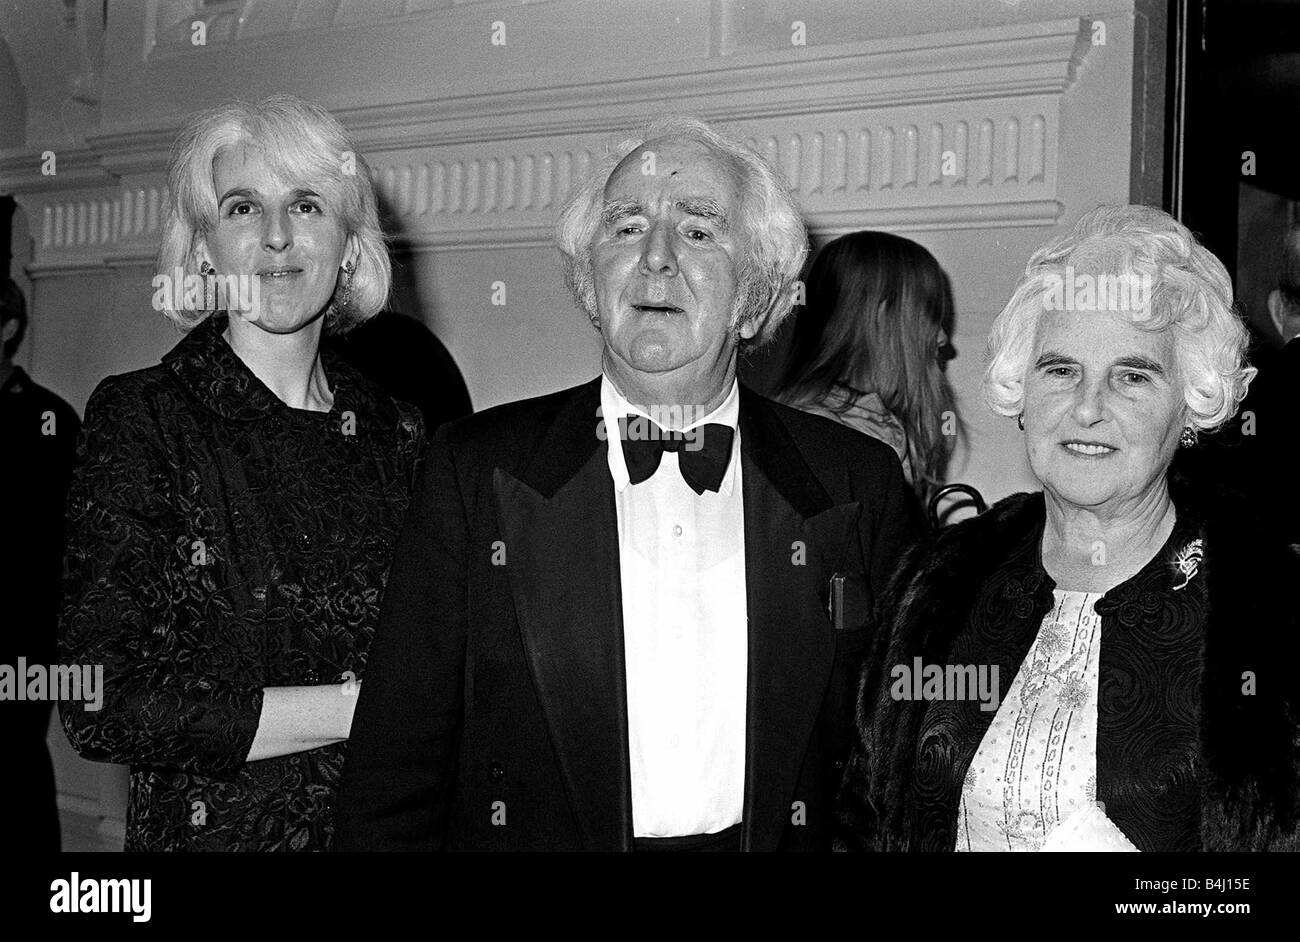 Re Opening Of Grand Opera House Belfast September 1980 Ulster actor Joe Tomelty arrives at the gala night with his wife and daughter Roma Belfast s Grand Opera House re opened in a blaze of glory after eight years in the dark September 1980 Stock Photo